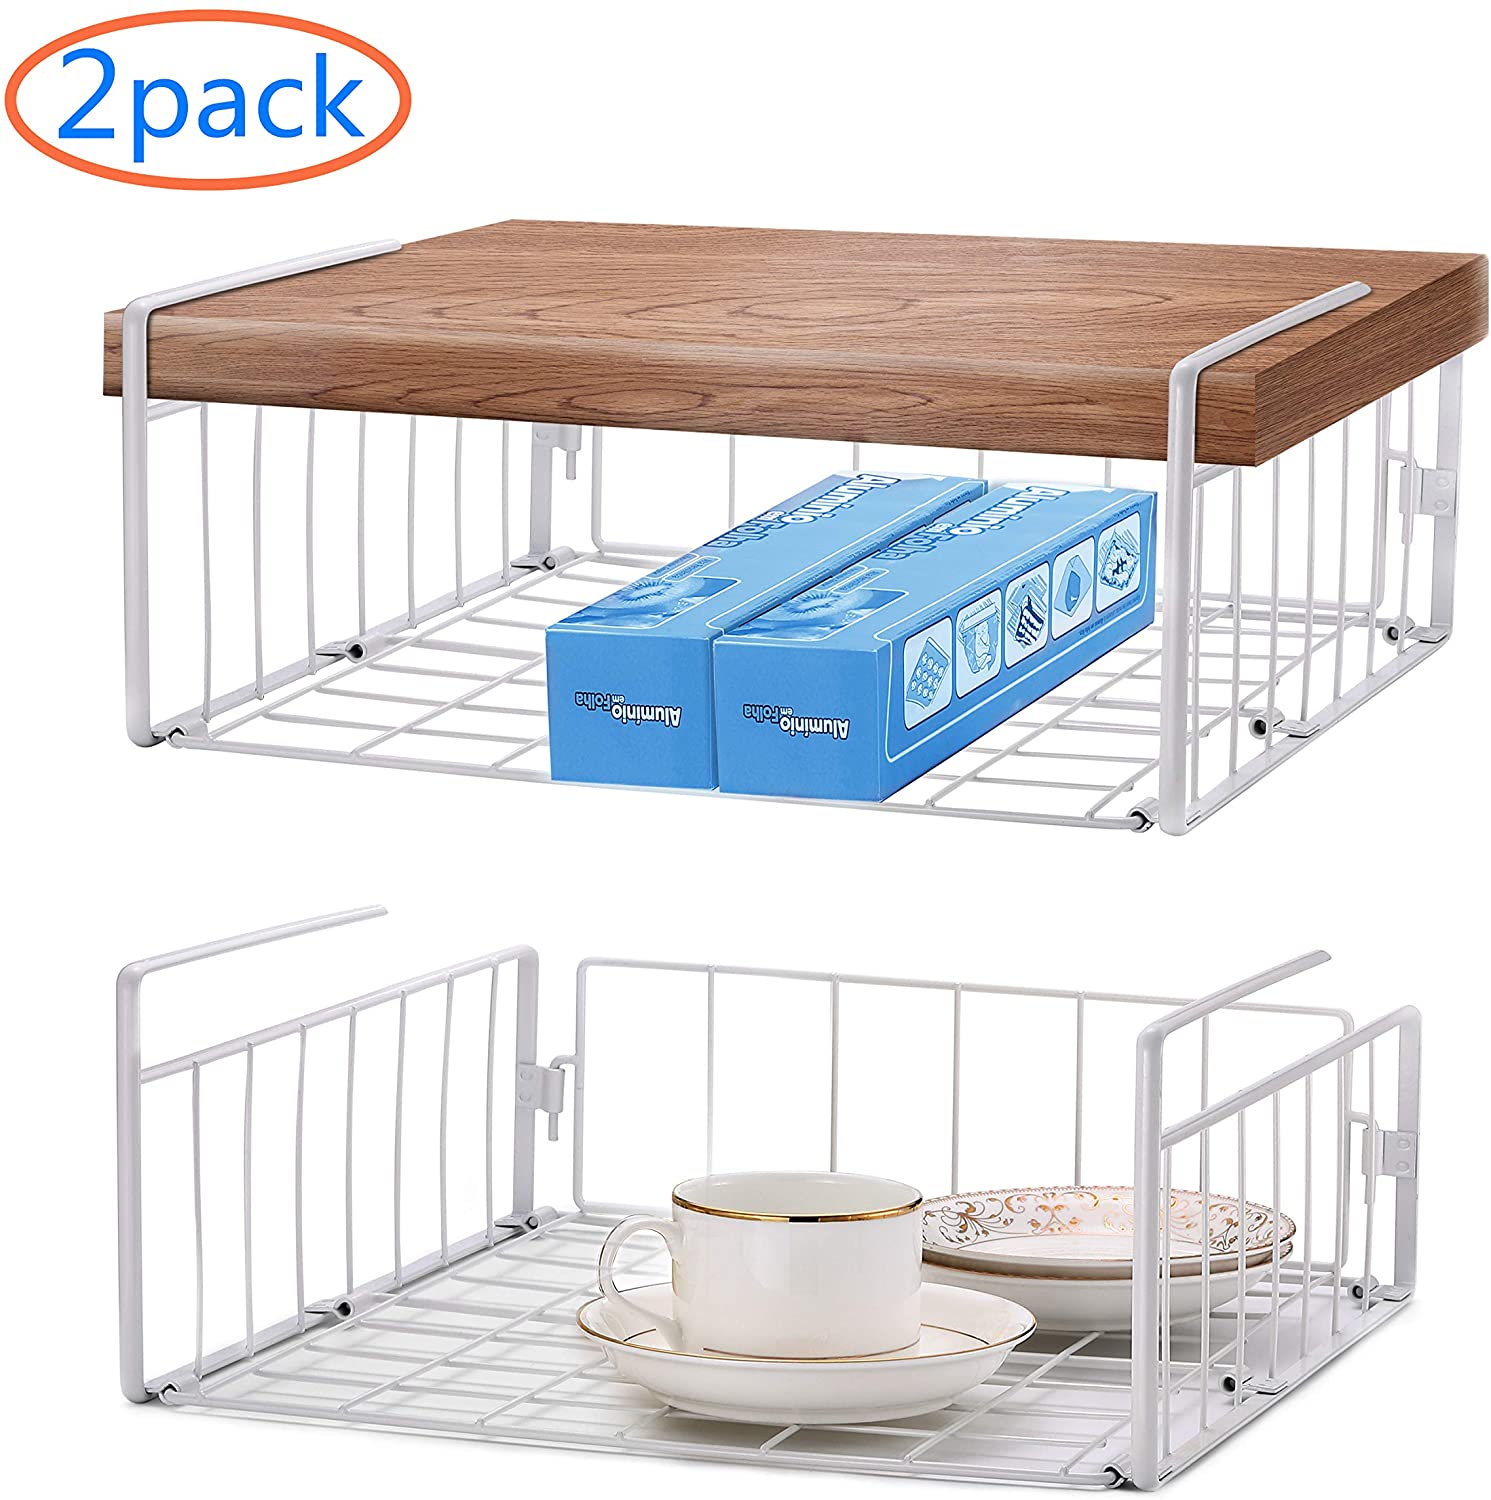 SimpleTrending Under Cabinet Organizer Shelf, 2 Pack Wire Rack Hanging Storage Baskets for Kitchen Pantry, White